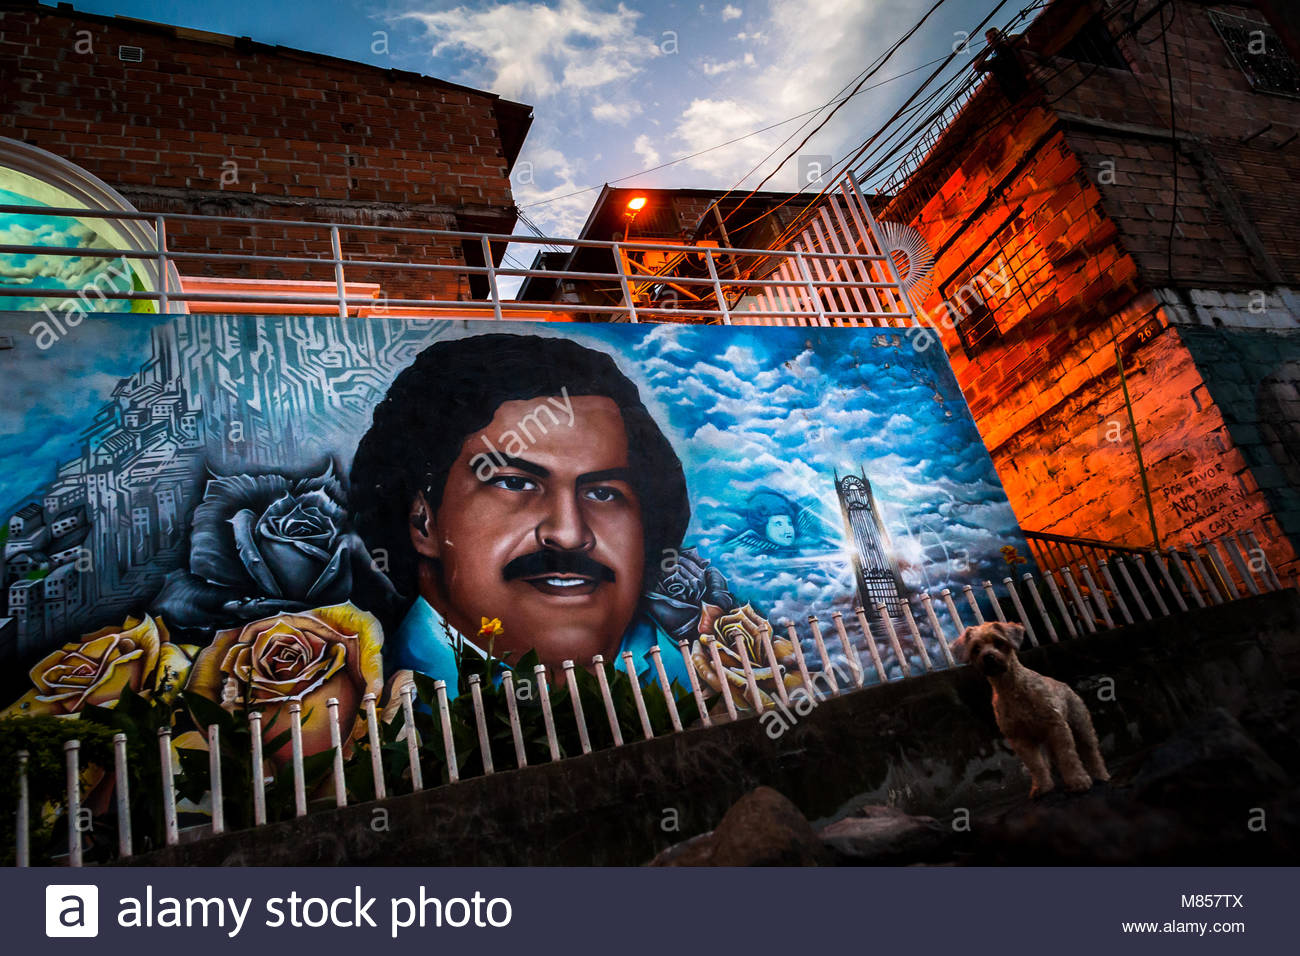 A large mural artwork depicting the lord Pablo Escobar is seen painted on